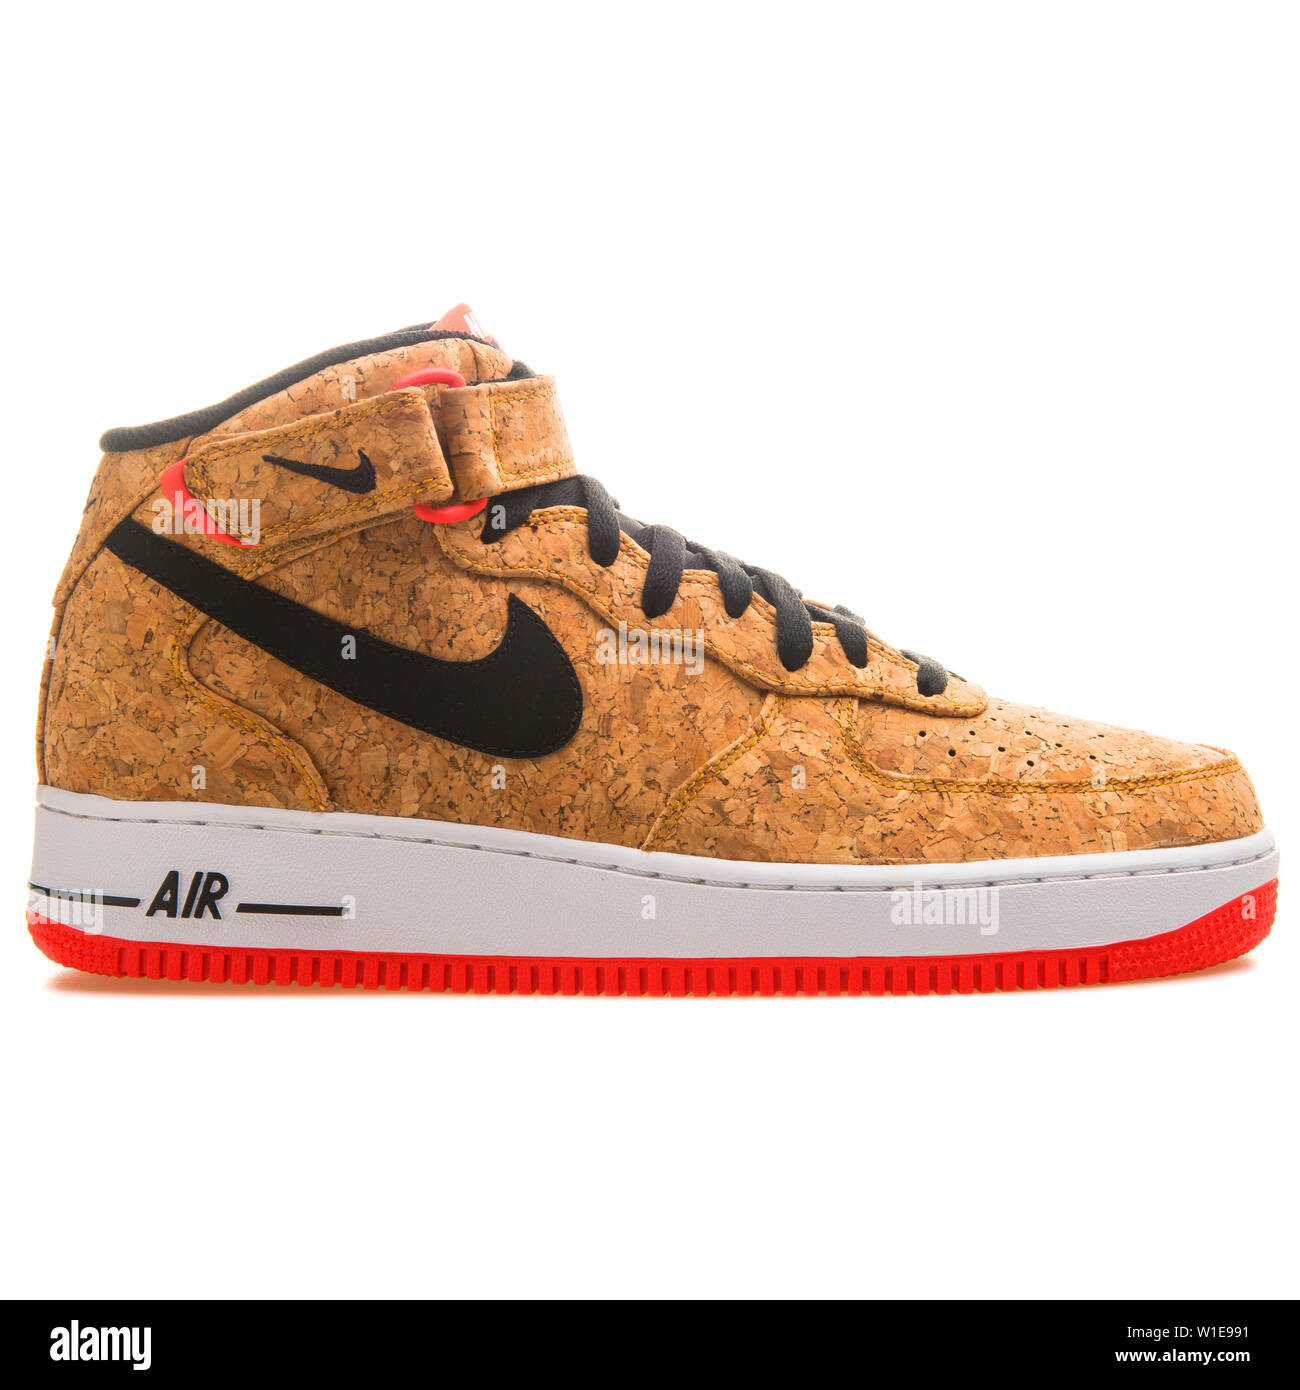 VIENNA, AUSTRIA - JUNE 14, 2017: Nike Air Force 1 Mid 07 Cork sneaker  isolated on white background Stock Photo - Alamy